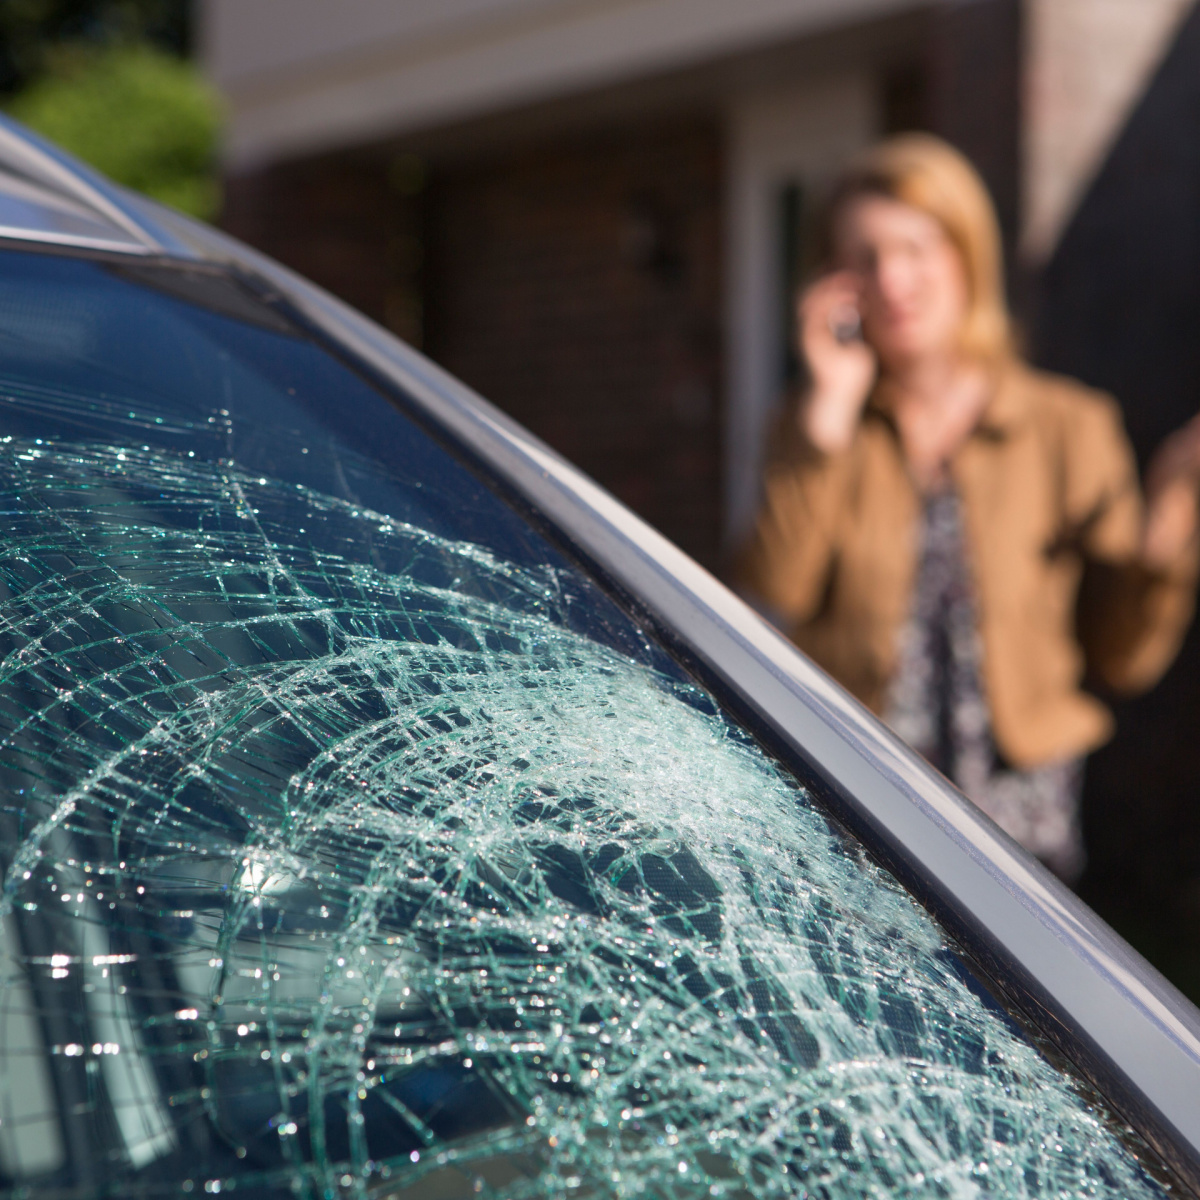 Joe’s Glass Co. is Your Speed Dial Place for Mobile Windshield Repair Services